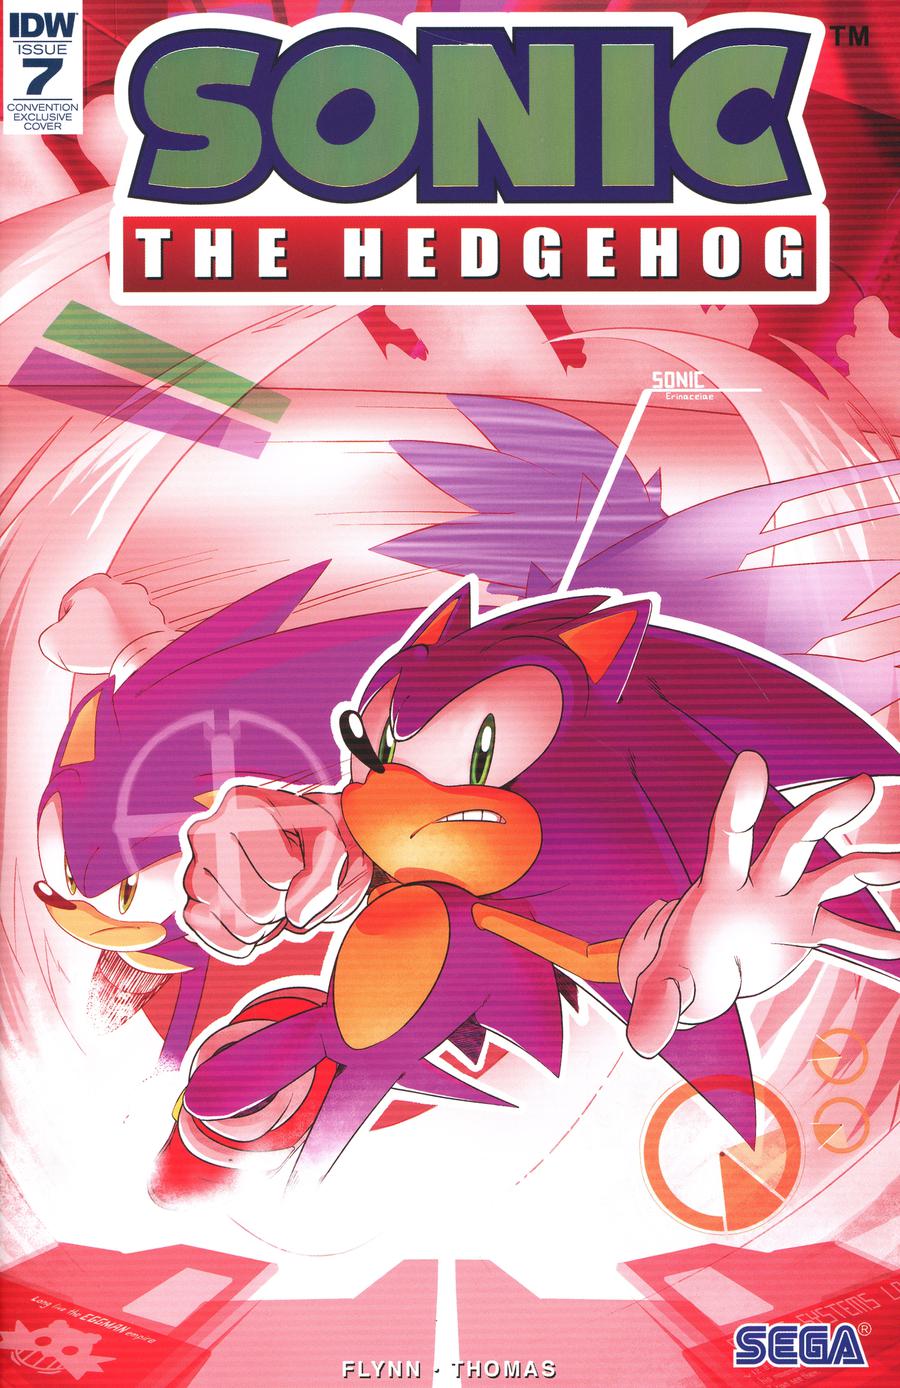 Sonic The Hedgehog Vol 3 #7 Cover D SDCC 2018 Exclusive Foil Variant Cover